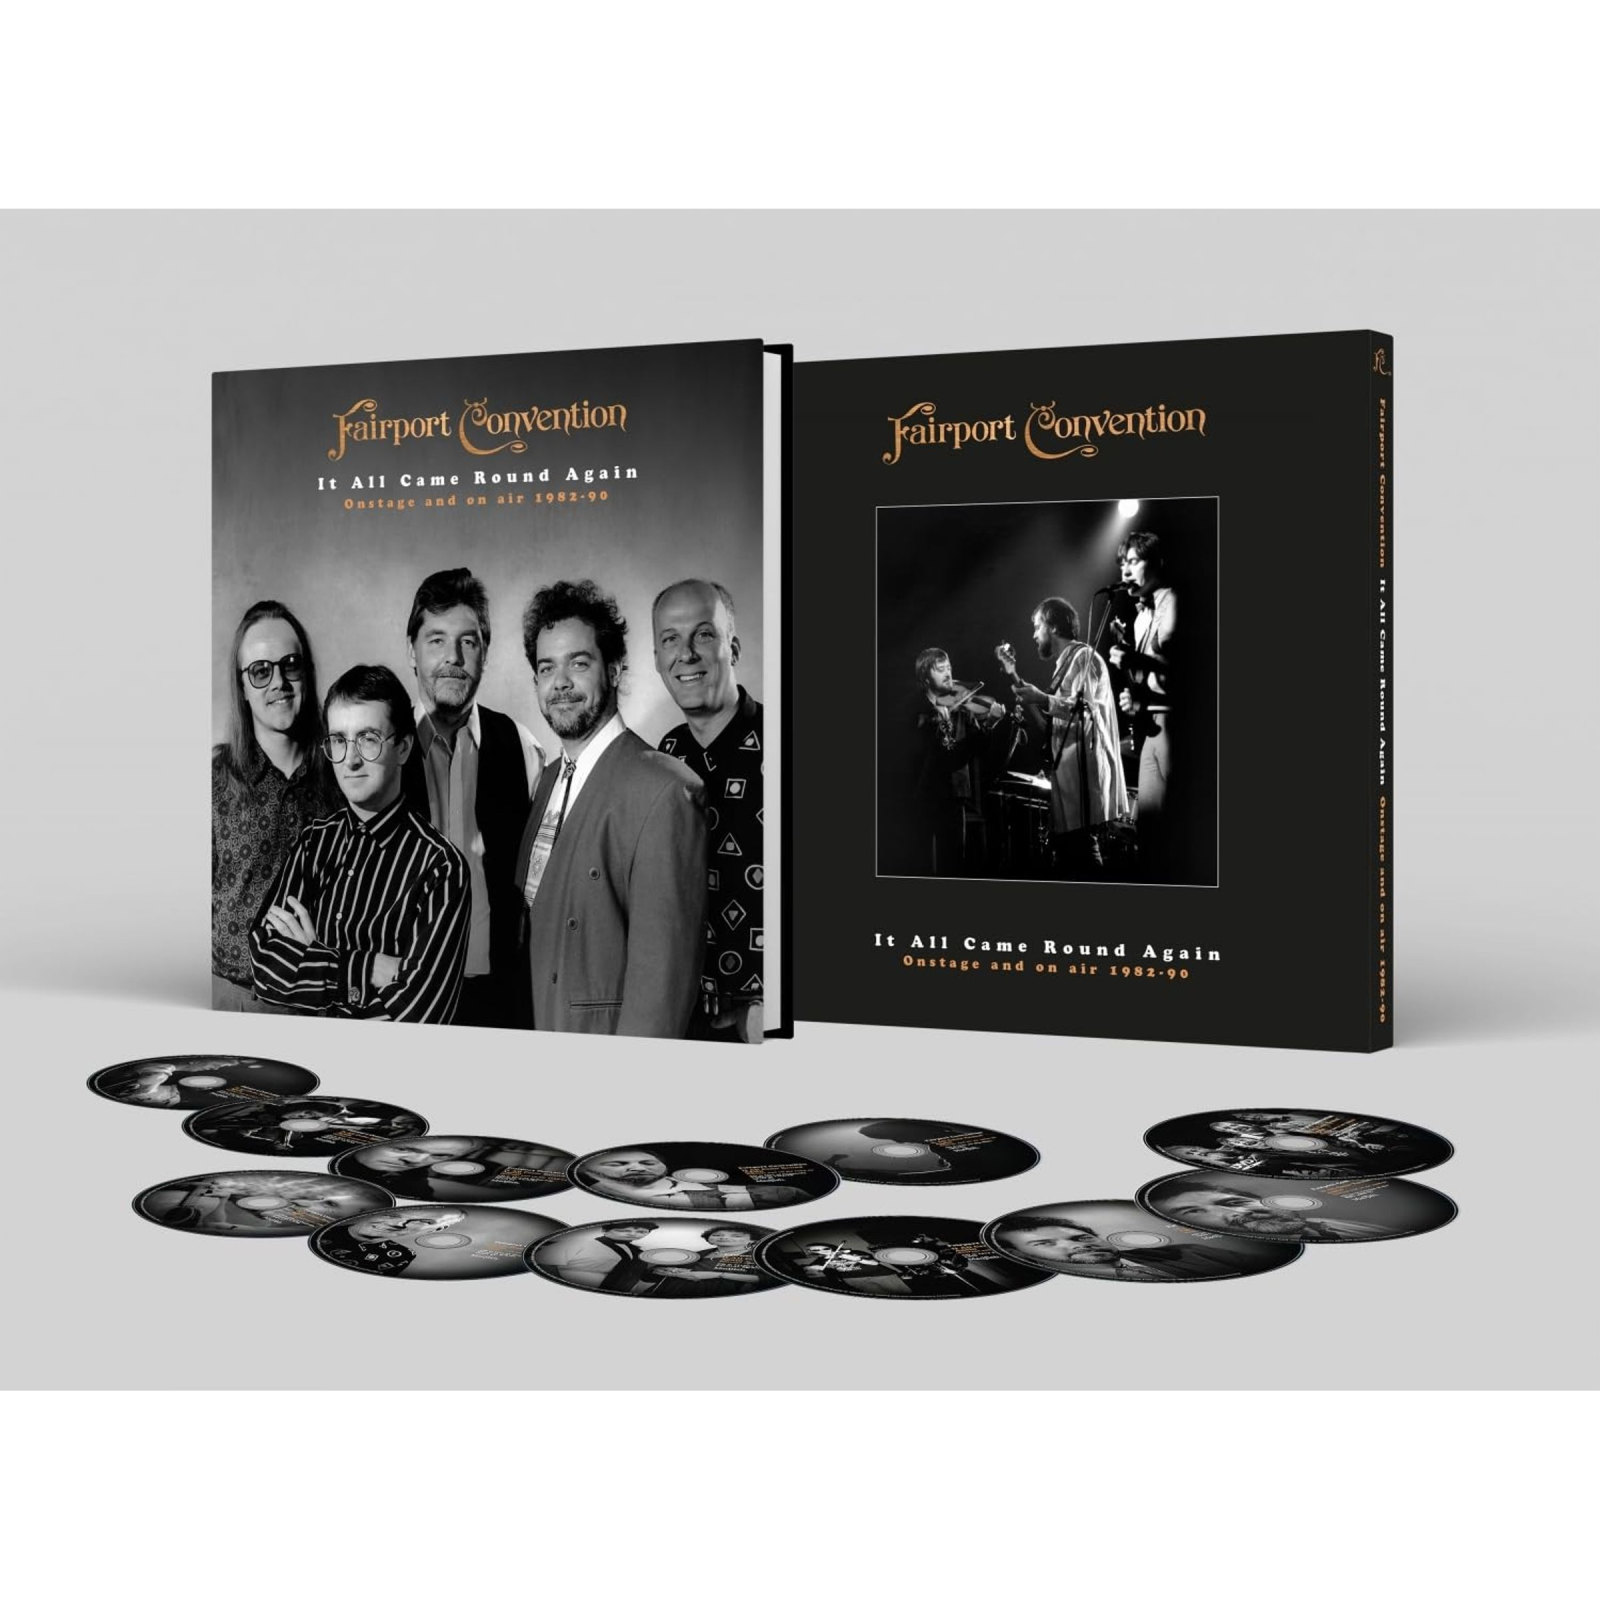 FAIRPORT CONVENTION - It All Came Round Again: Onstage And On Air 1982-1990  - Limited | 0636551828758